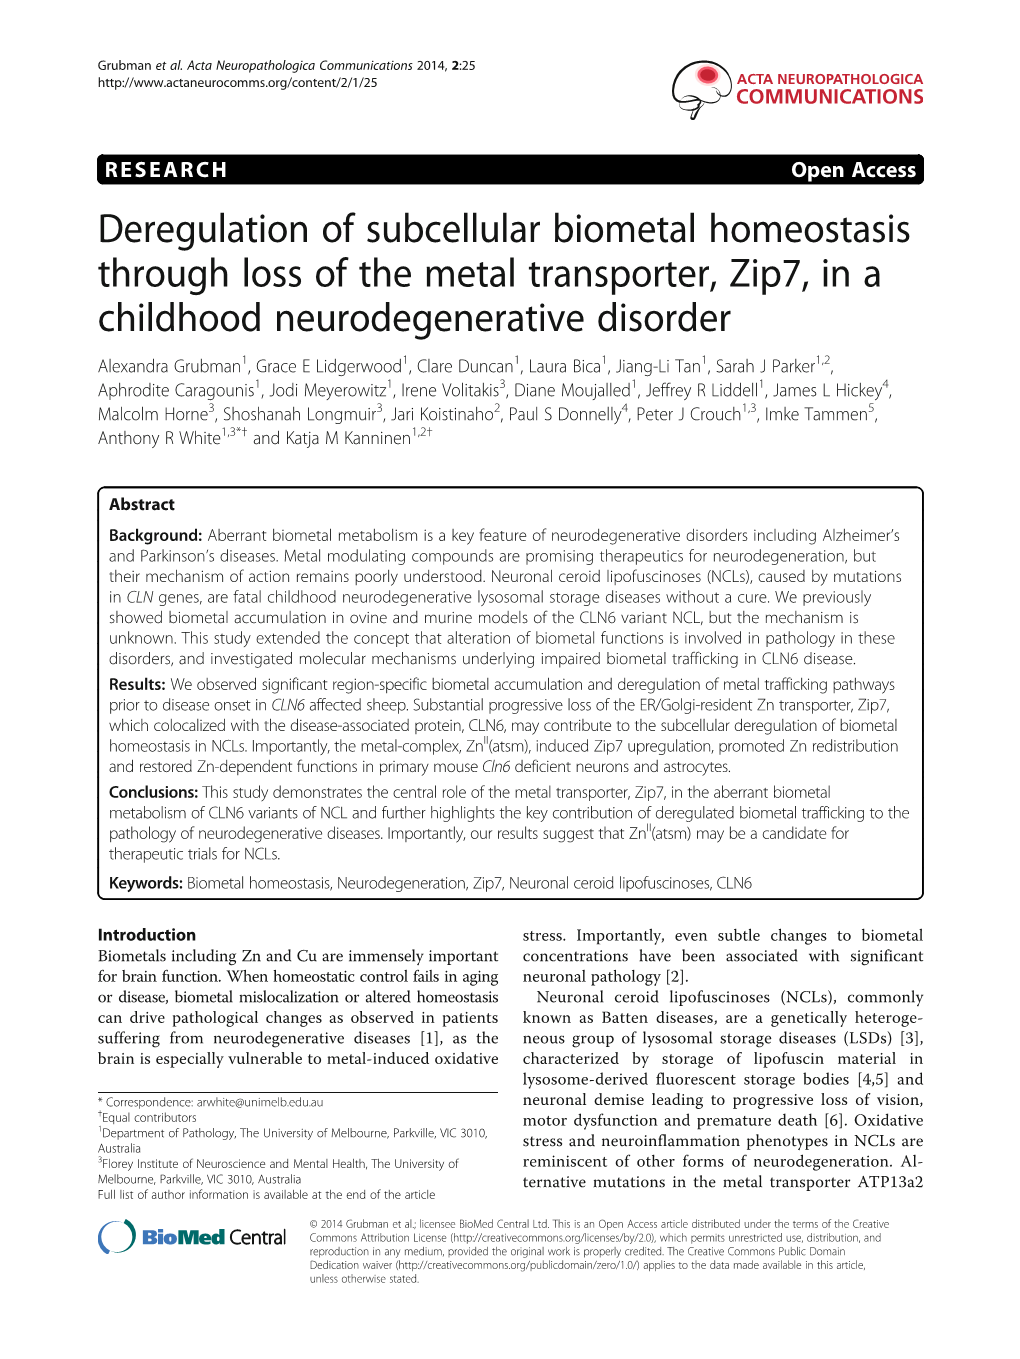 Deregulation of Subcellular Biometal Homeostasis Through Loss of The